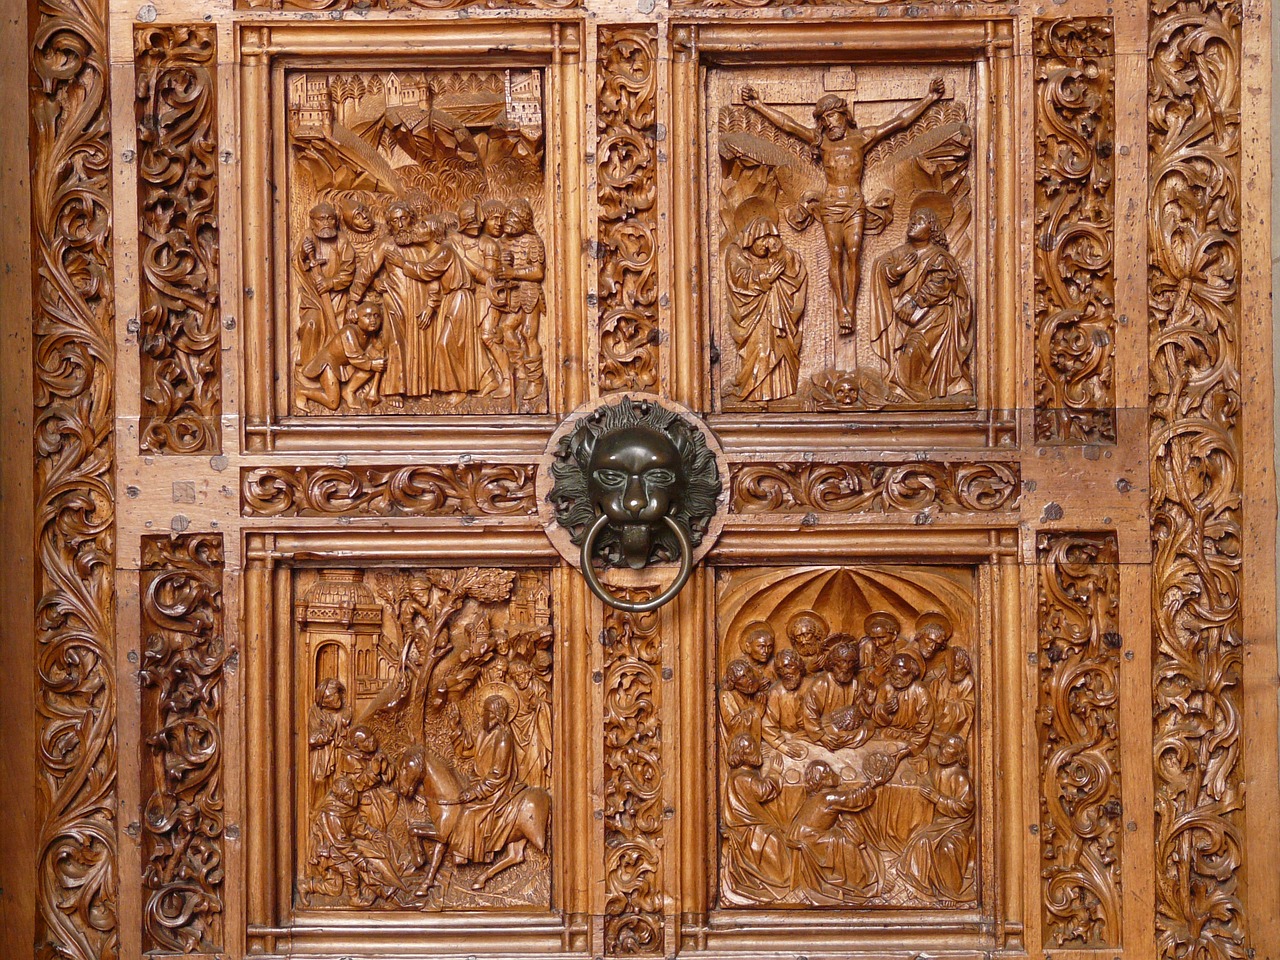 wood carving,door,wood,church door,ornament,doorknocker,jesus,free pictures, free photos, free images, royalty free, free illustrations, public domain